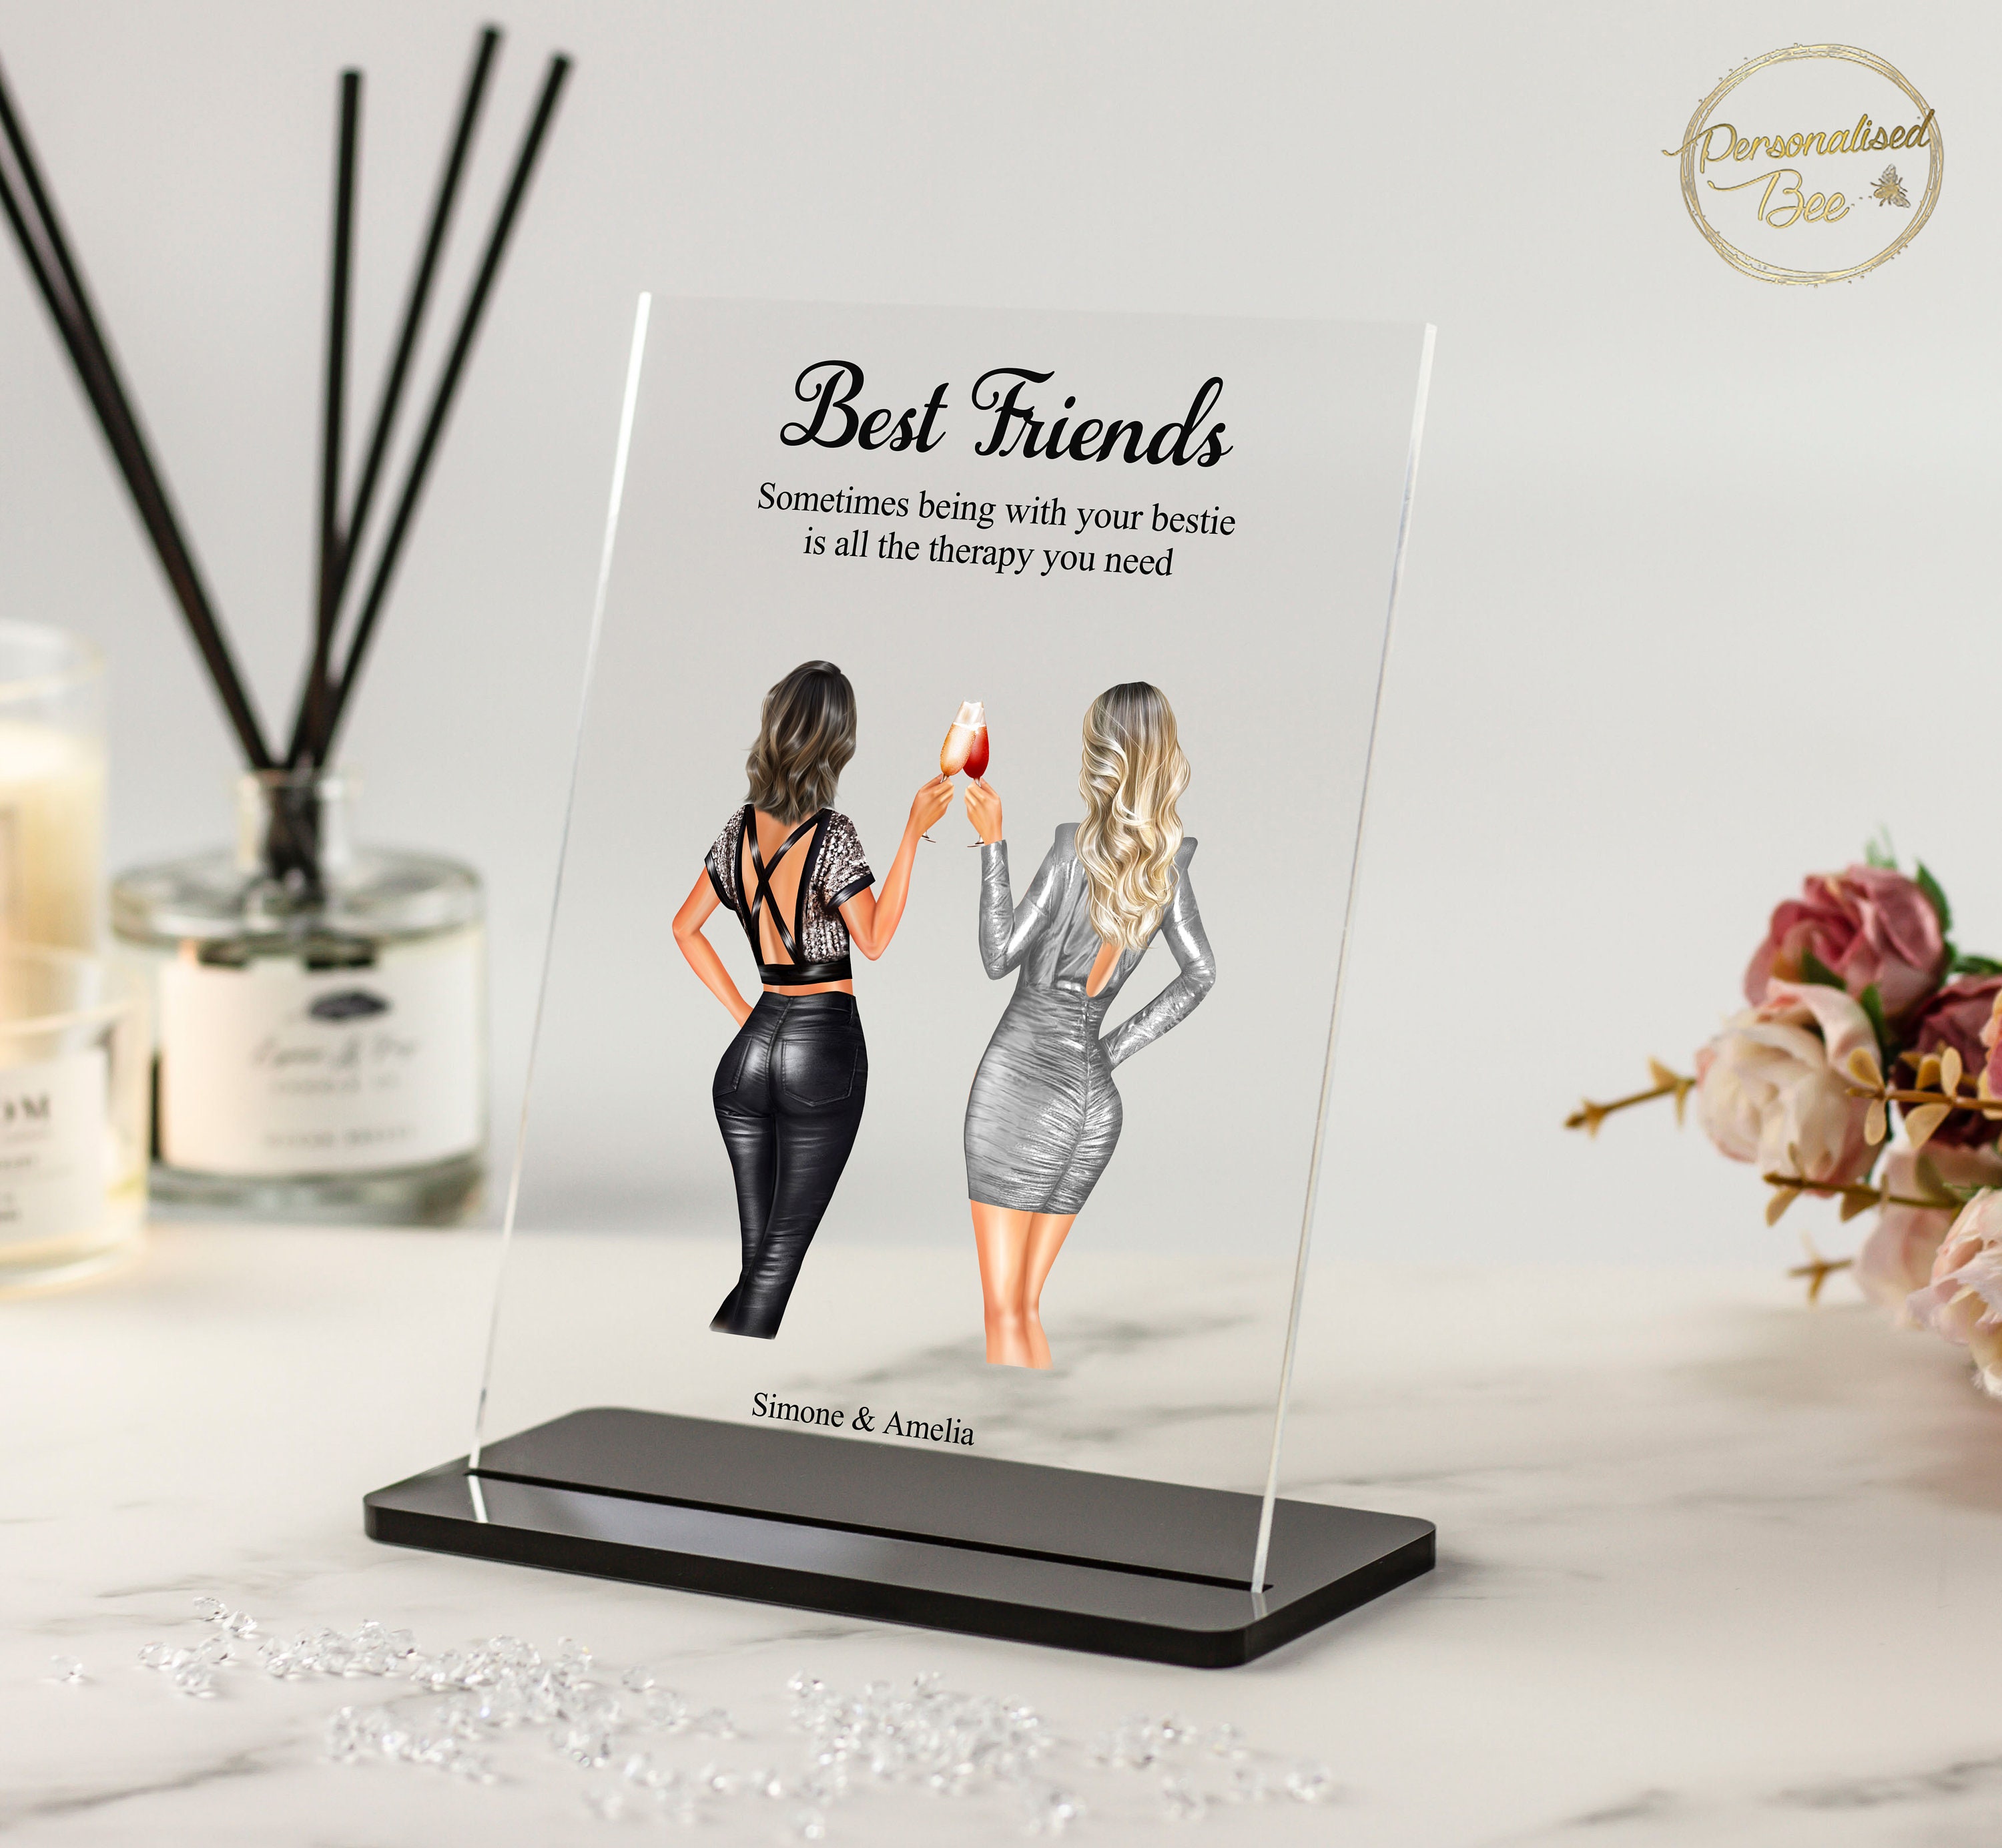 Best Friends Gifts! Best friends gift ideas any girl will love! Find cool,  unique …